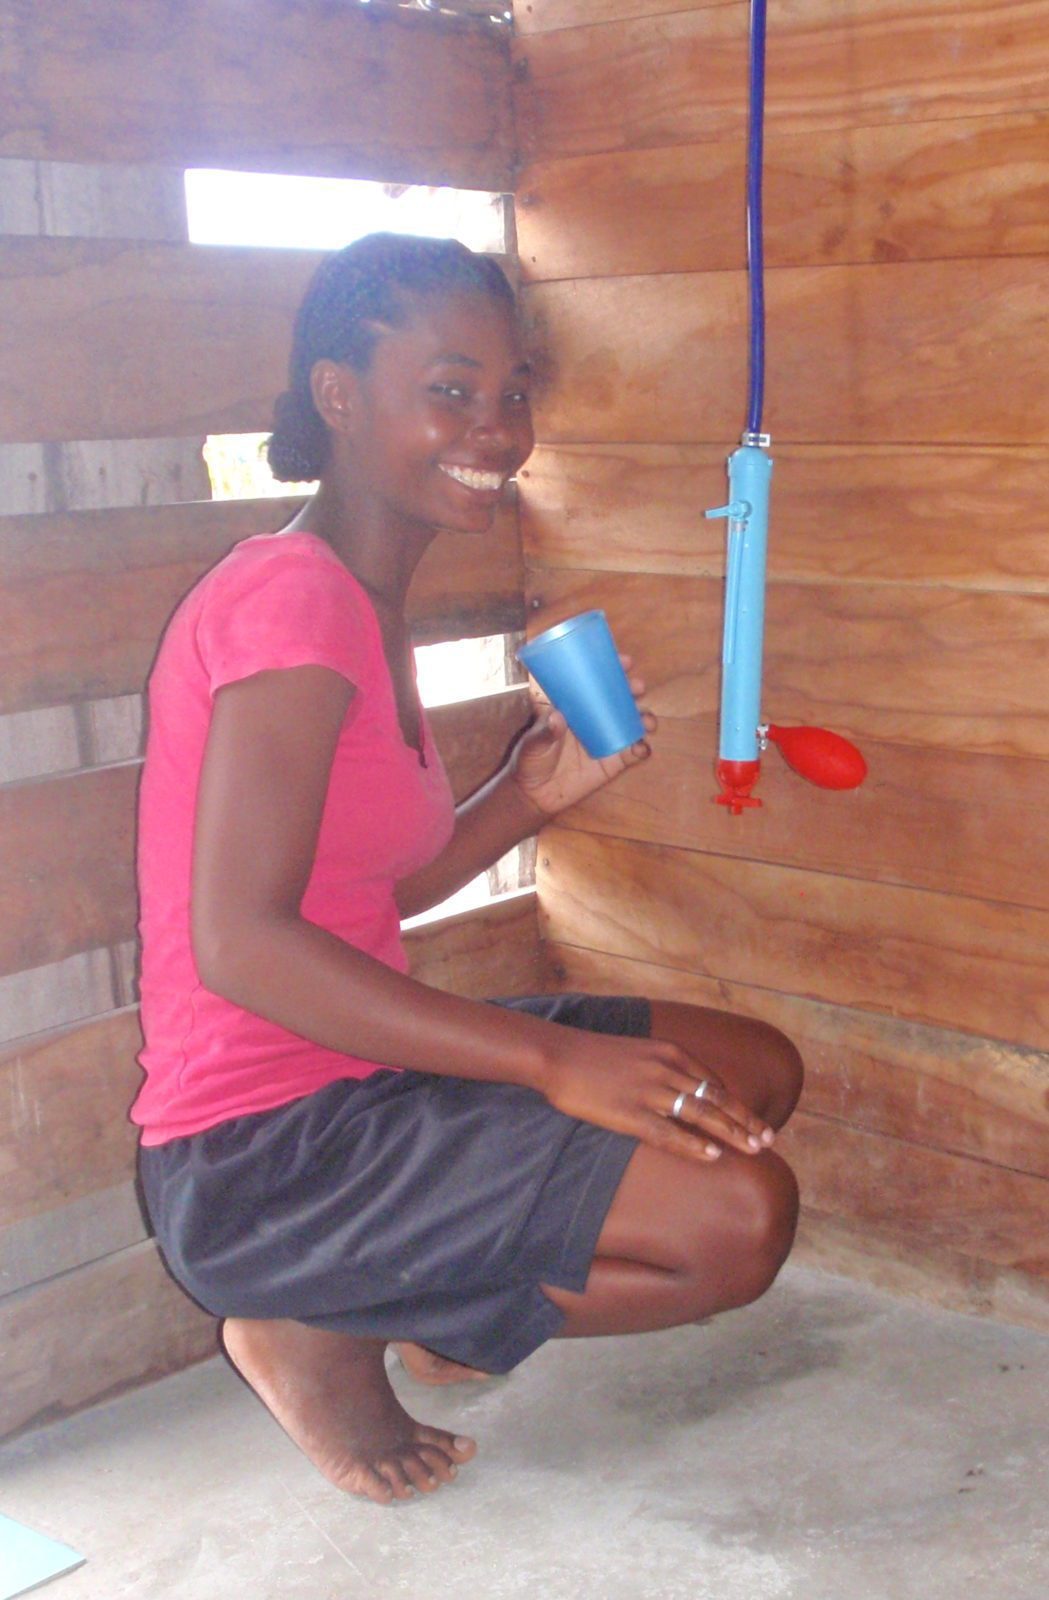 Voahirana enjoys drinking water filtered through a Family LifeStraw because it tastes really pure and she knows that it is clean